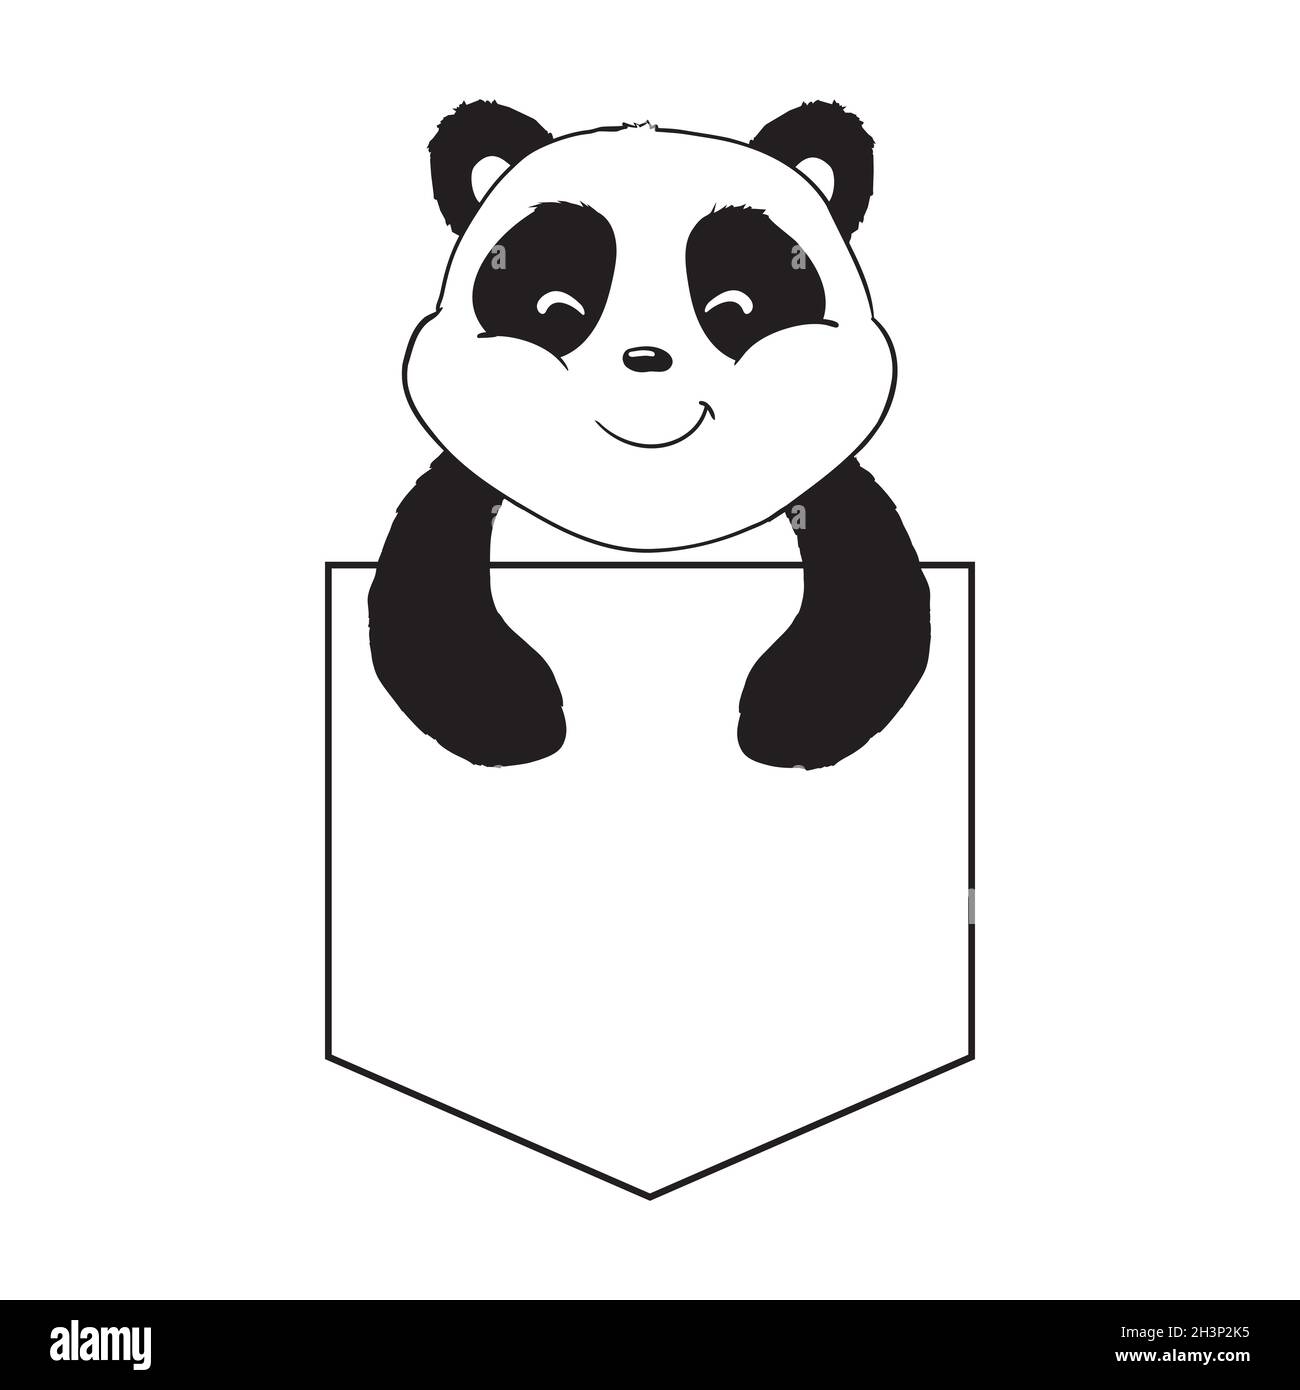 Easy How to Draw a Panda Bear Tutorial and Panda Coloring Page-saigonsouth.com.vn